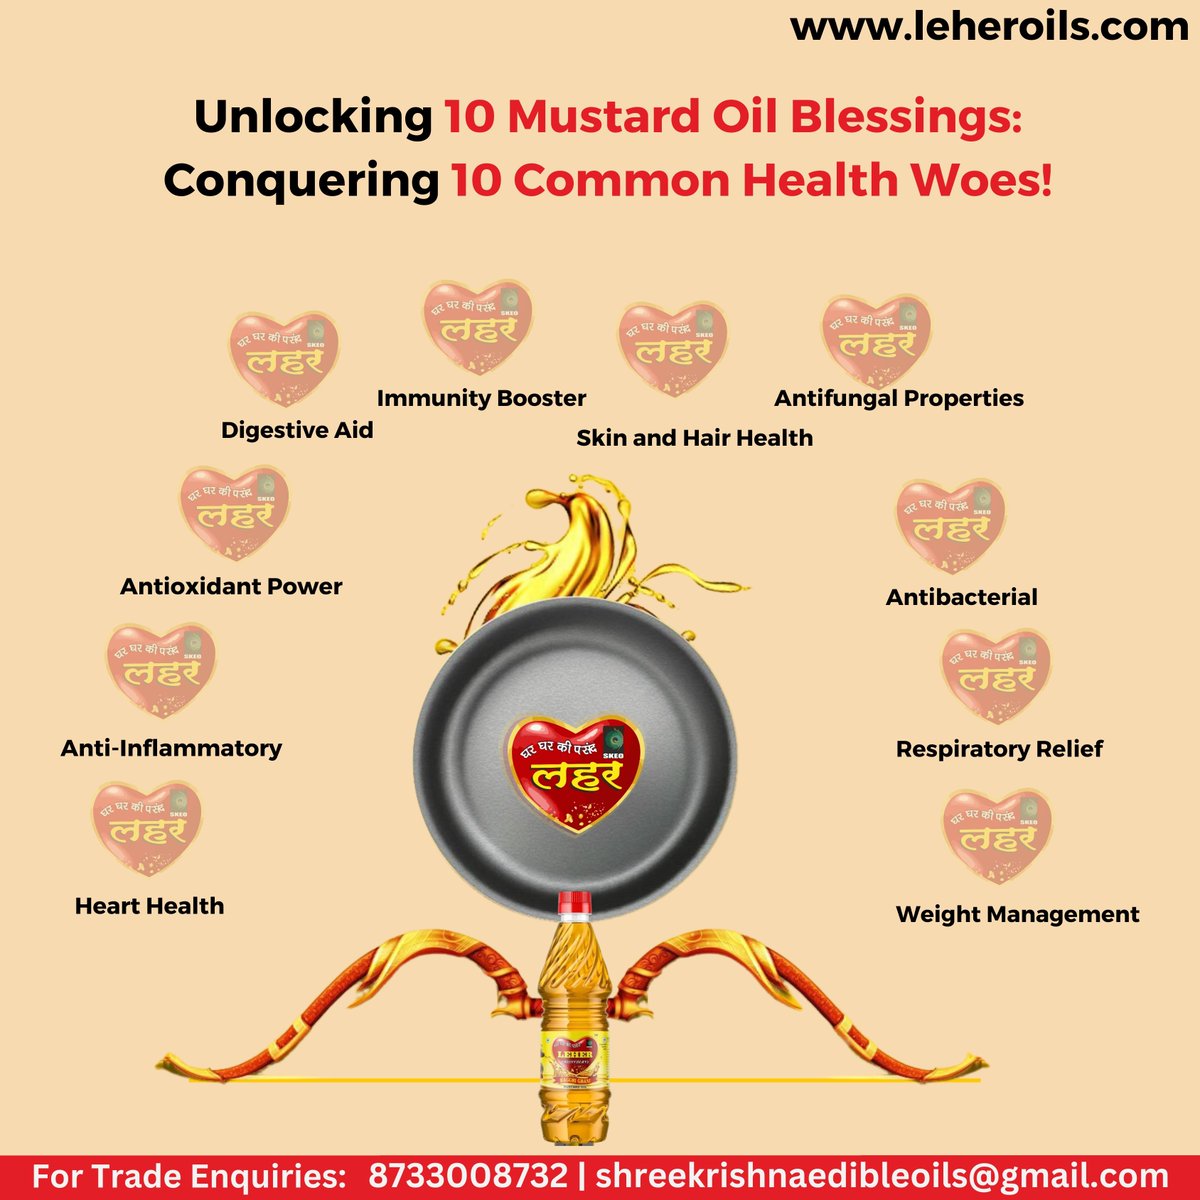 GoddessBlessings #dussehra2023  Discover the 10 Health Blessings of Mustard Oil this Dussehra! 📷📷 Conquer common health woes with the power of nature. #DussehraHealthBlessings #MustardOilMagic #HealthyLiving #ConquerHealthWoes #NaturalRemedies #wellnessjourney2023